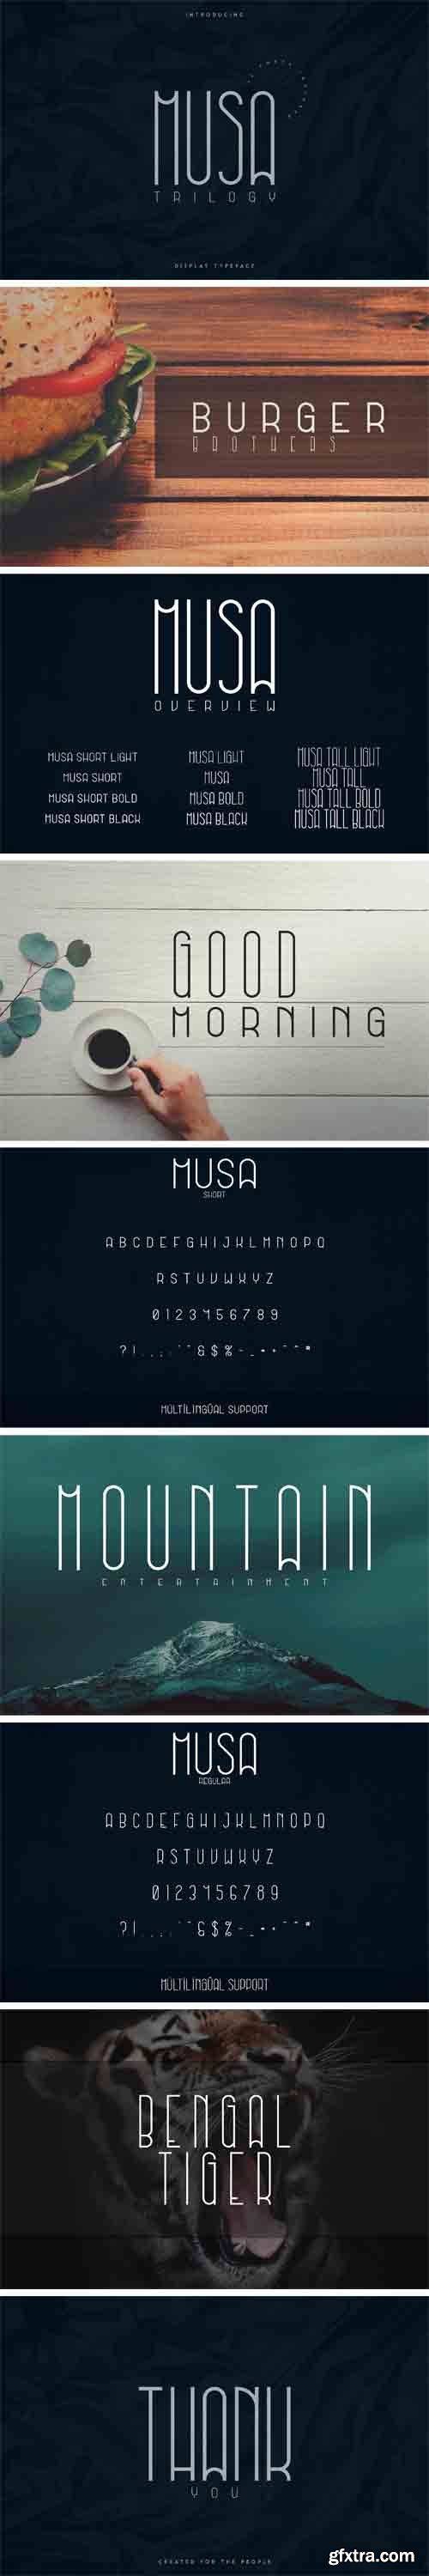 CM - Musa Display Typeface - 12 Fonts 3109556